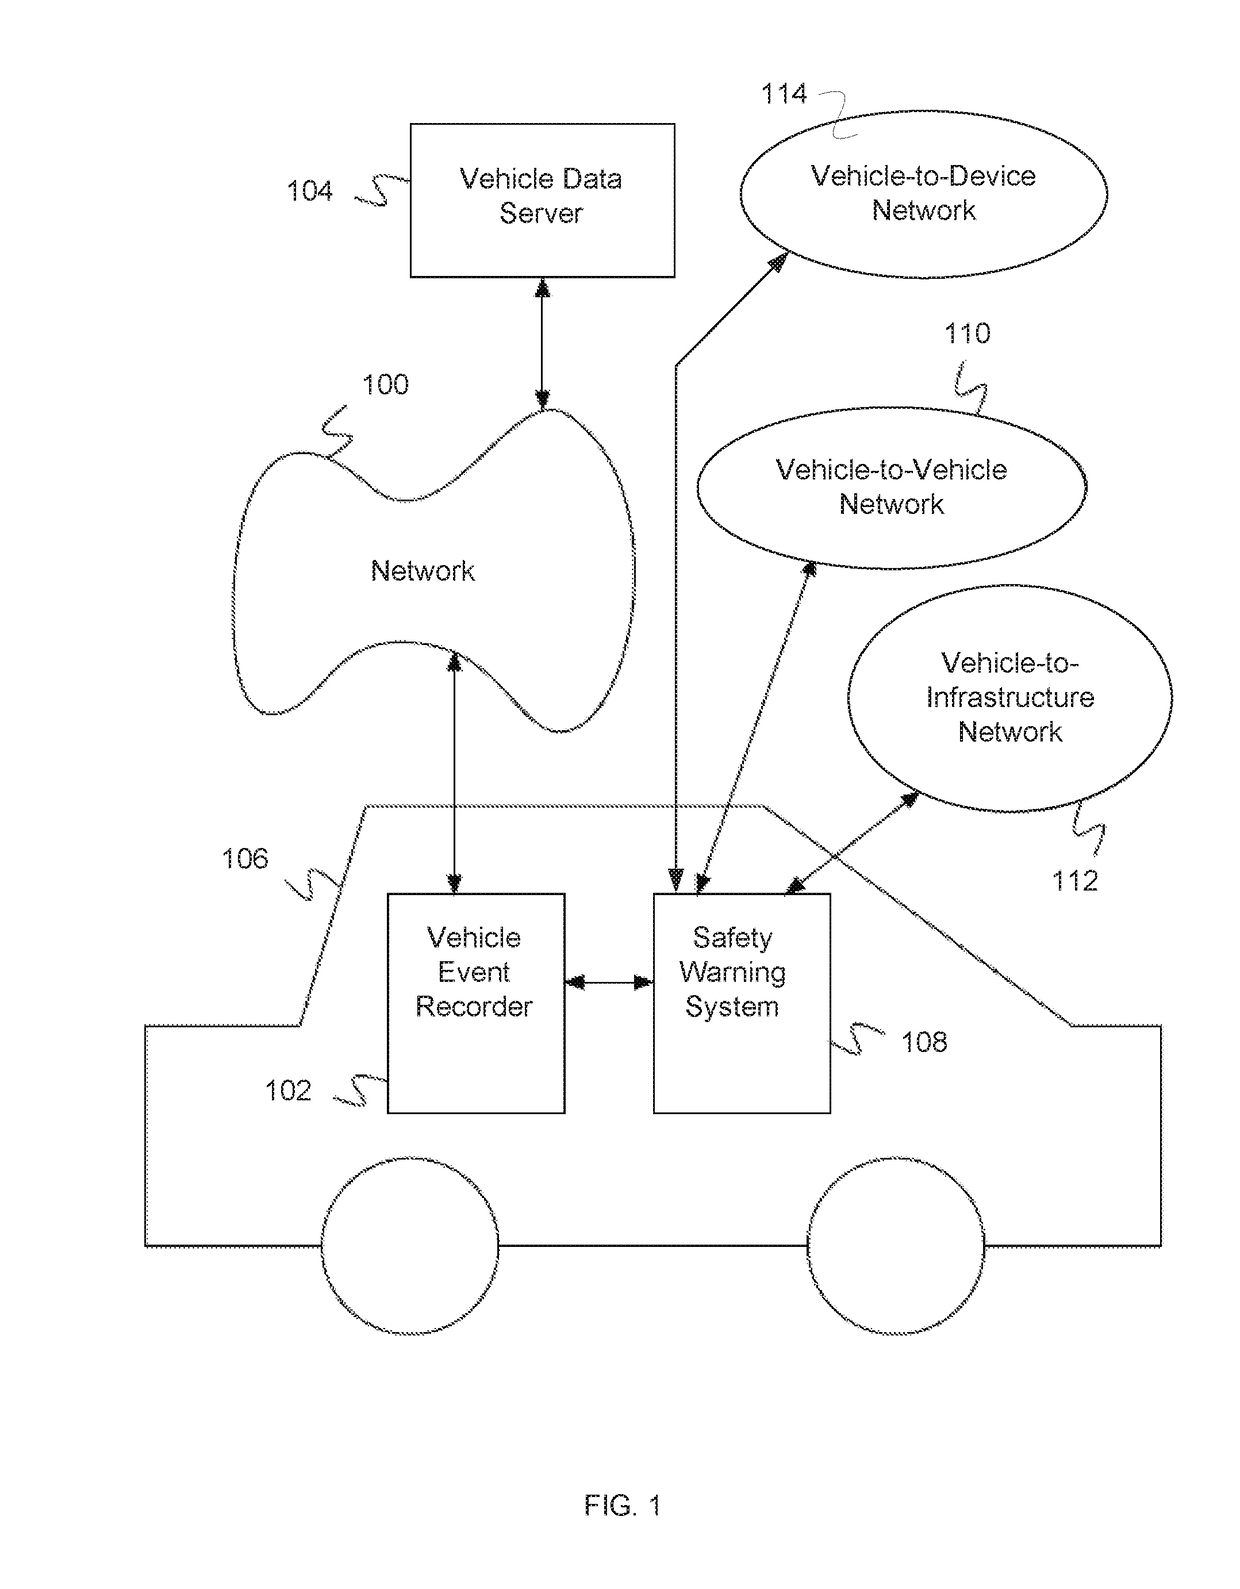 Driver coaching from vehicle to vehicle and vehicle to infrastructure communications